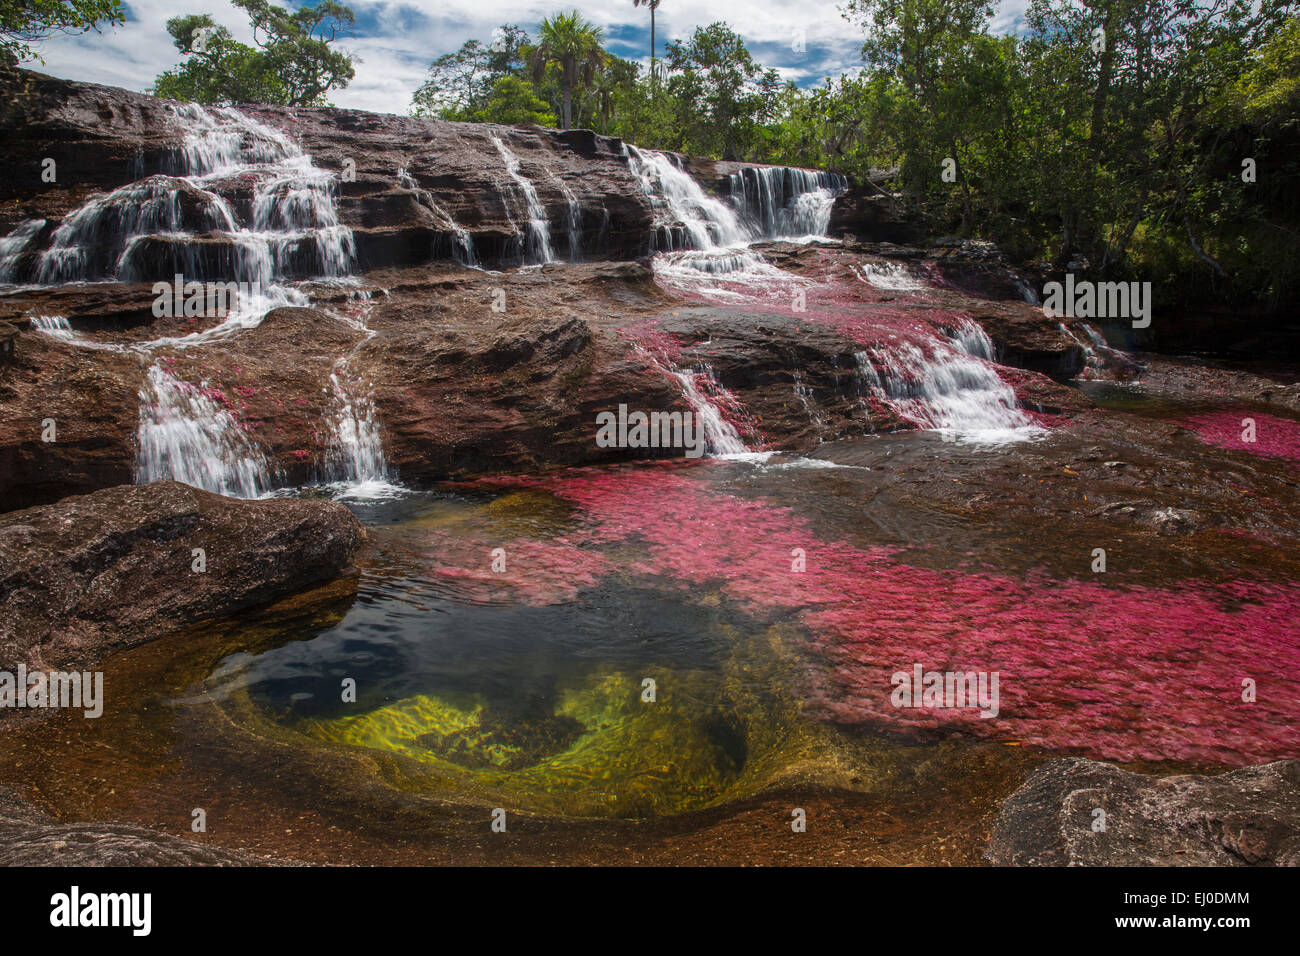 River, Flow, brook, body of water, nature, water, South America, Latin America, Colombia, red, colorful, canyon, Cano Cristales, Stock Photo